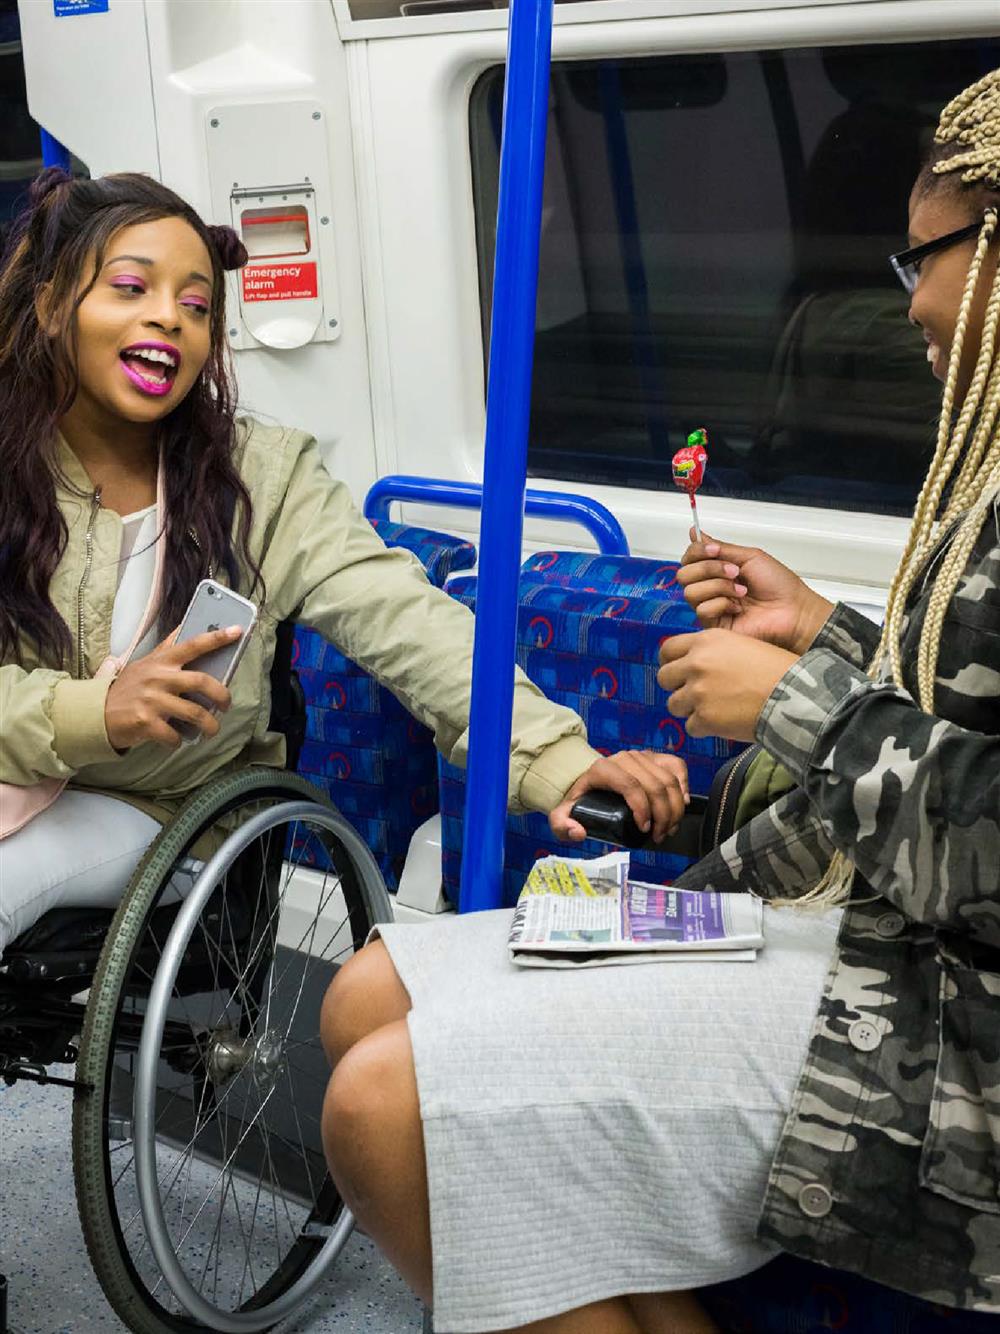 Two women, the one on the left is sitting in a wheelchair, are enjoying a ride on the London tube, conversing and laughing with eachother. The woman on the right is holding a red lollipop. 